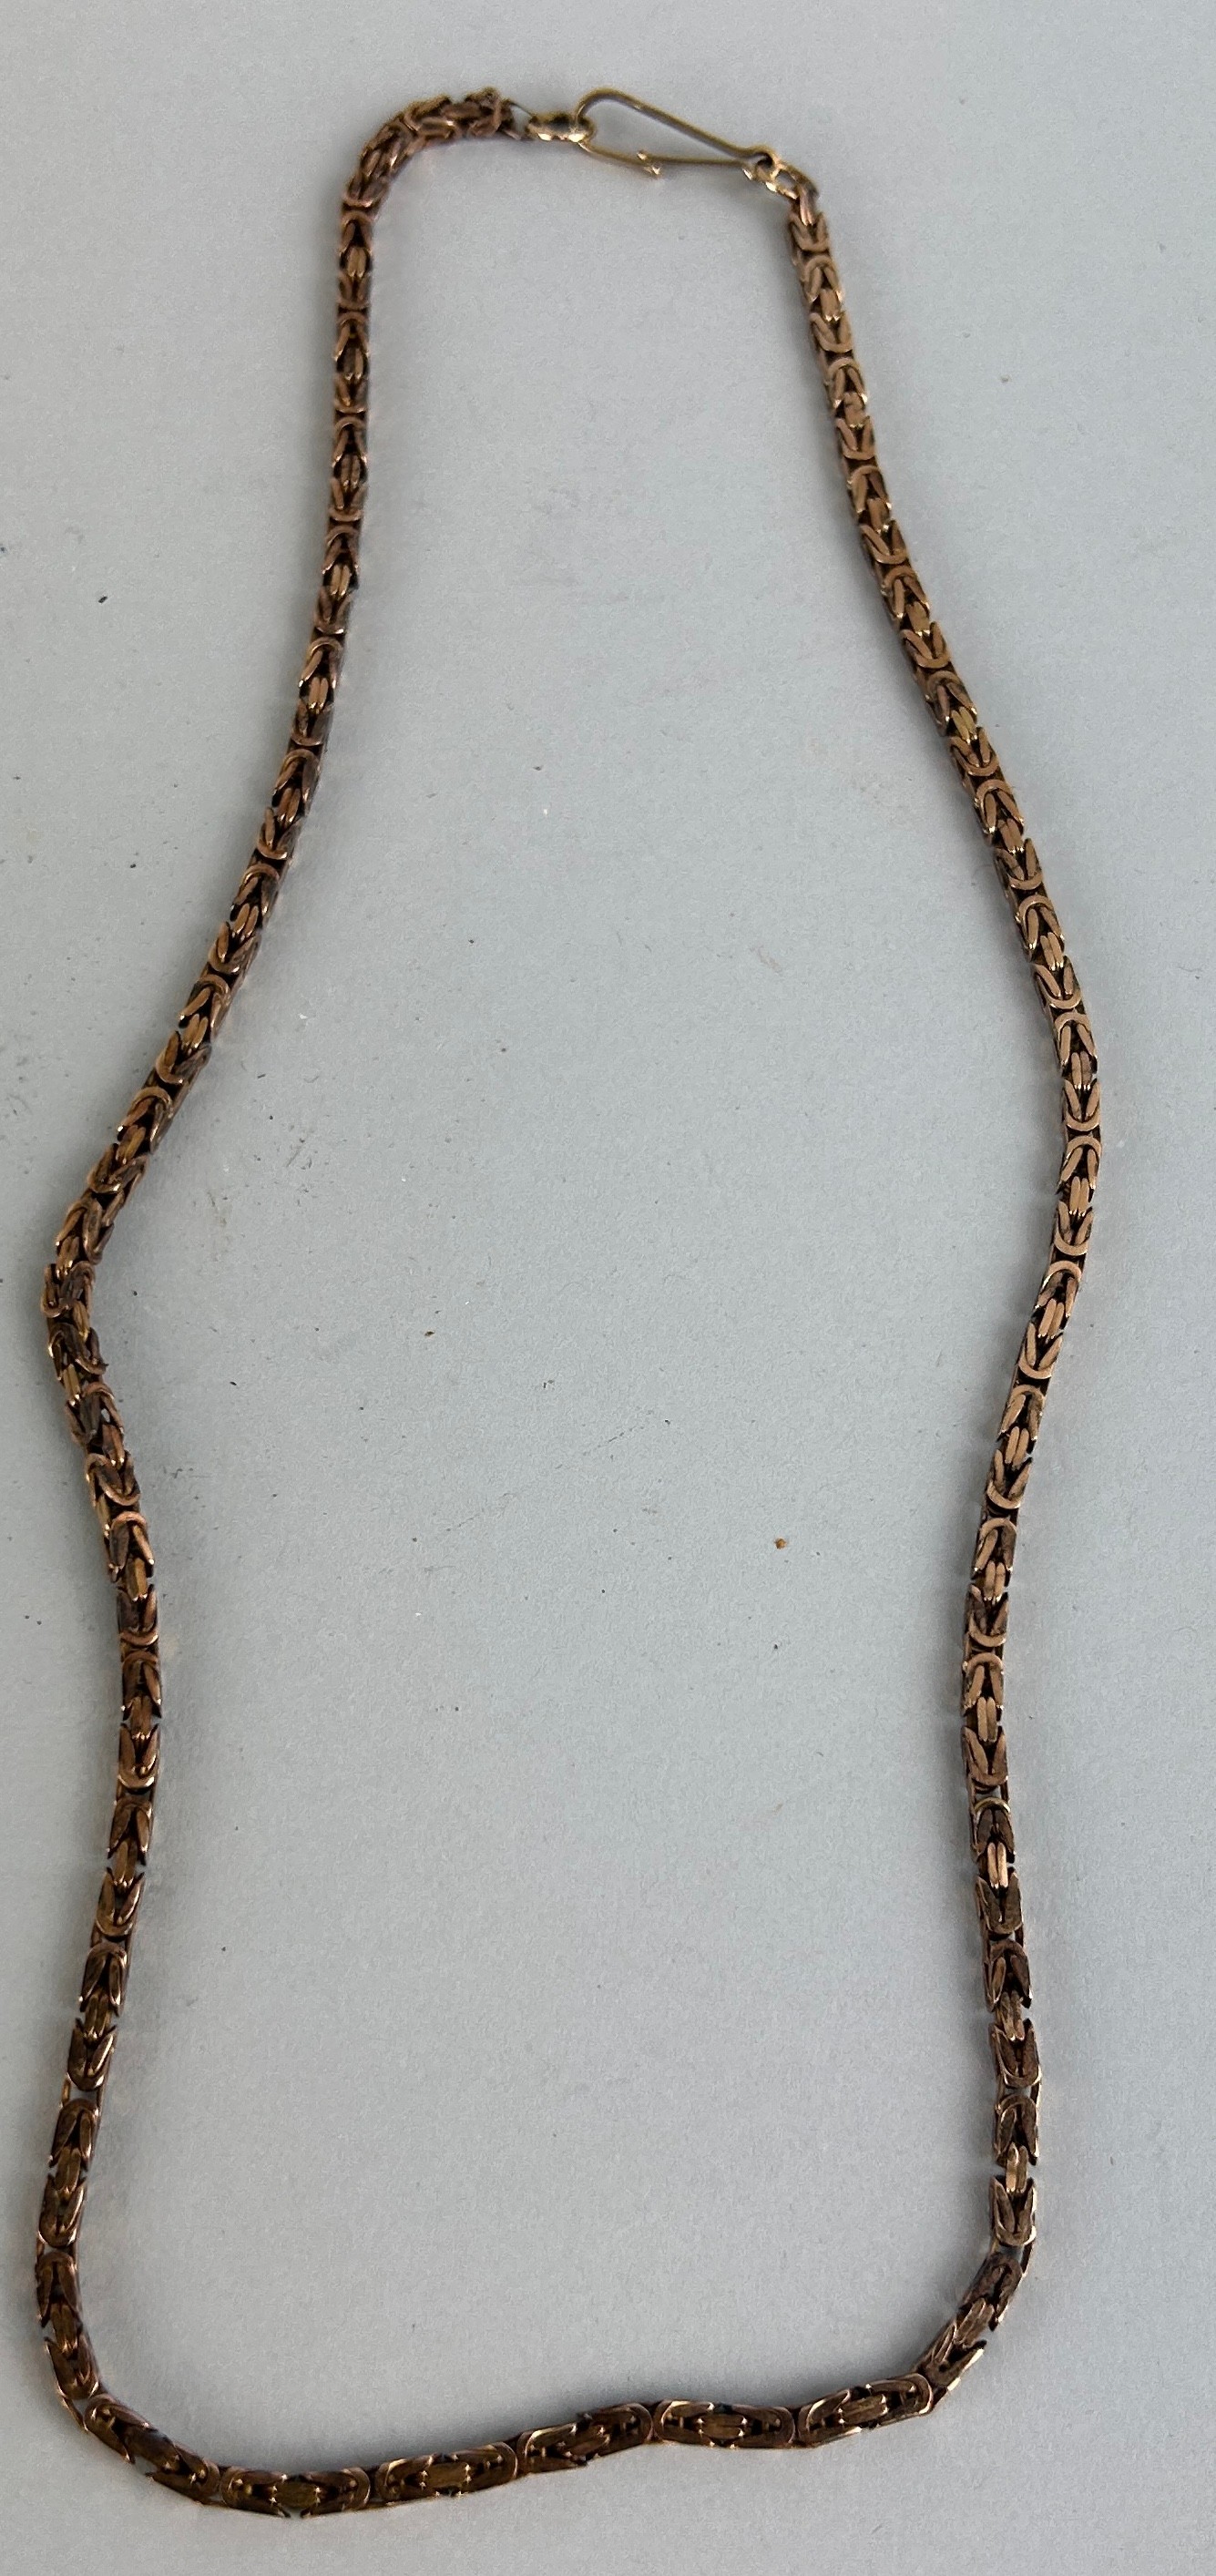 A 14CT GOLD CHAIN, Weight 20gms - Image 2 of 2